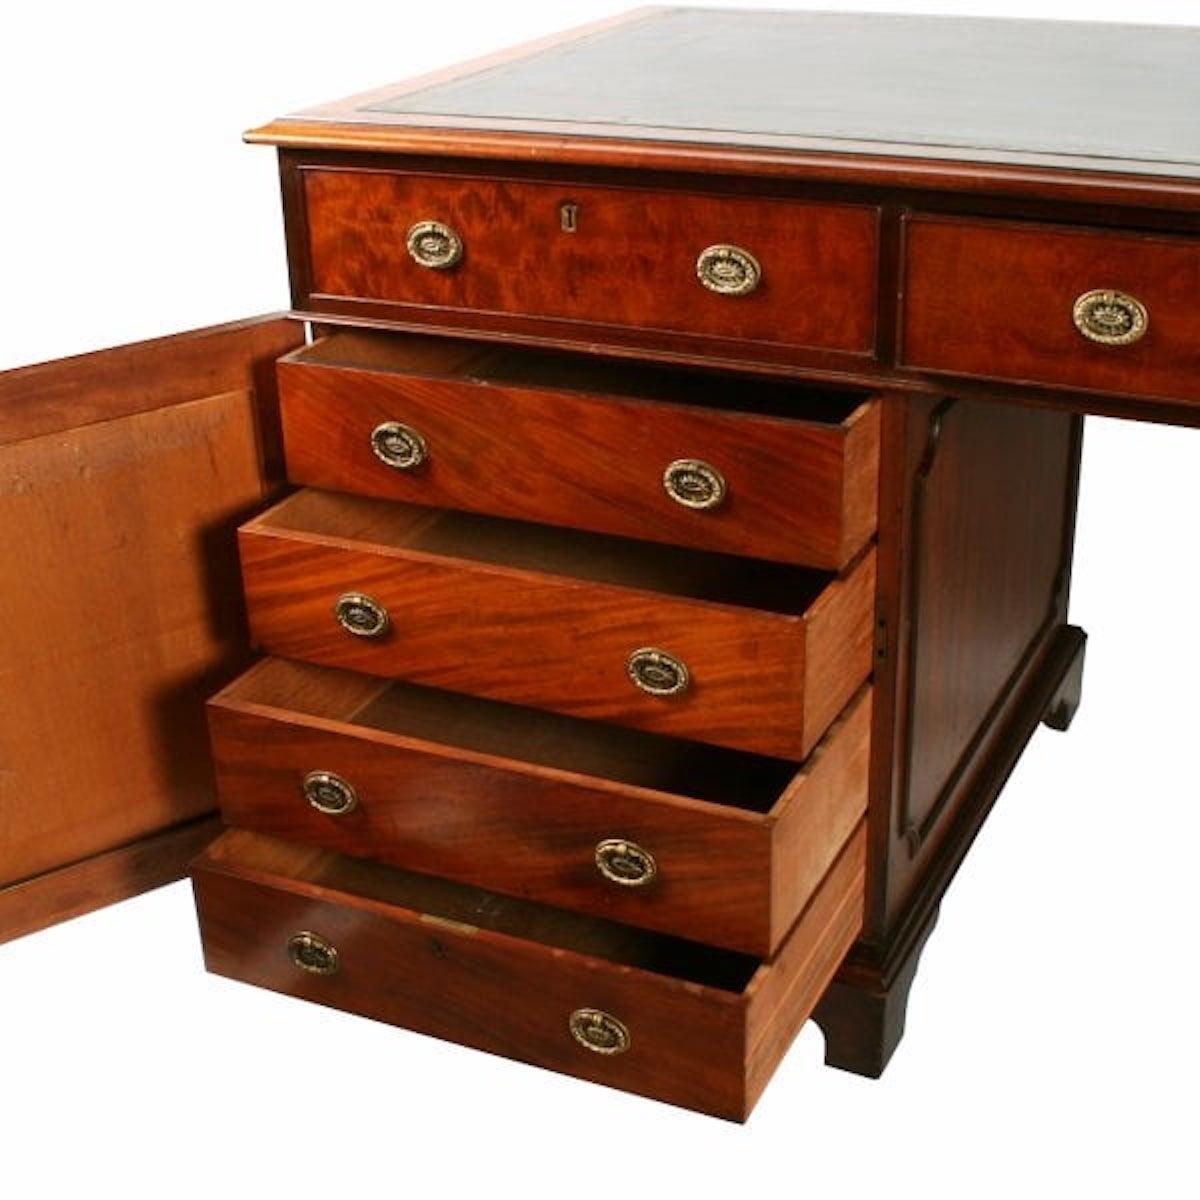 Georgian Mahogany Pedestal Desk, 18th Century In Excellent Condition For Sale In Southall, GB